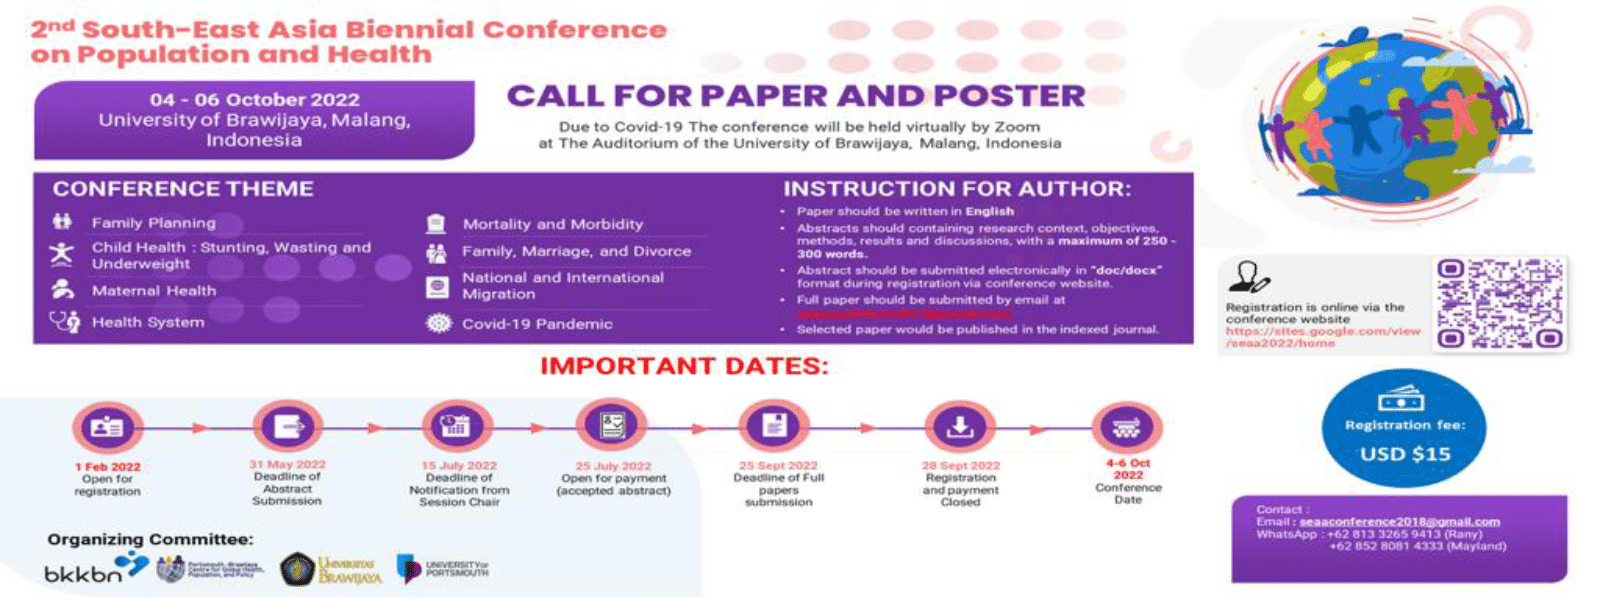 Flyer 2nd Biennial Conference South-East Asia Population and Health(1)